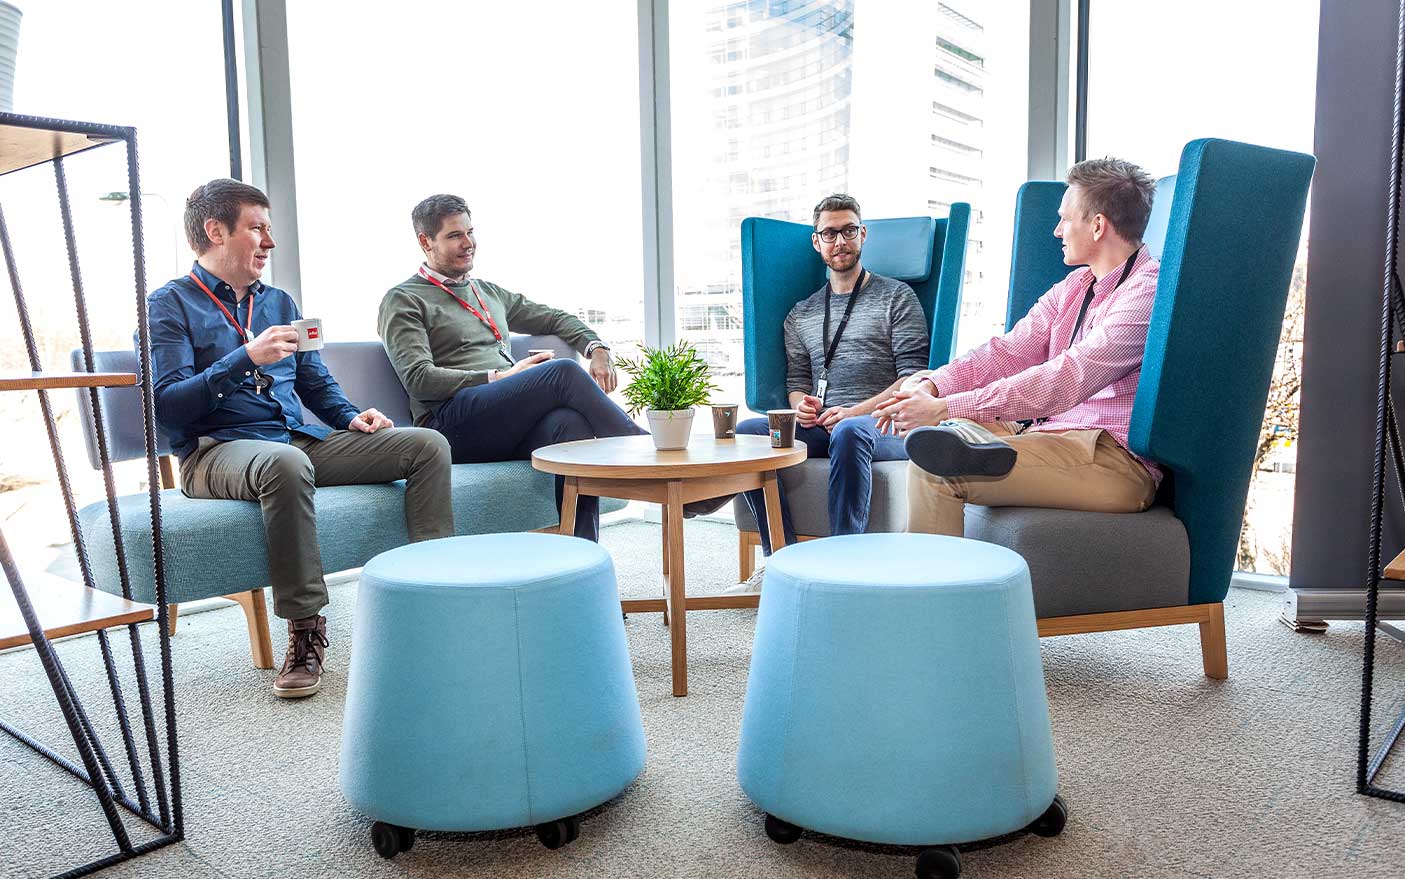 Co-workers meeting in a fresh-looking breakout area, supplied by Mobius At Work